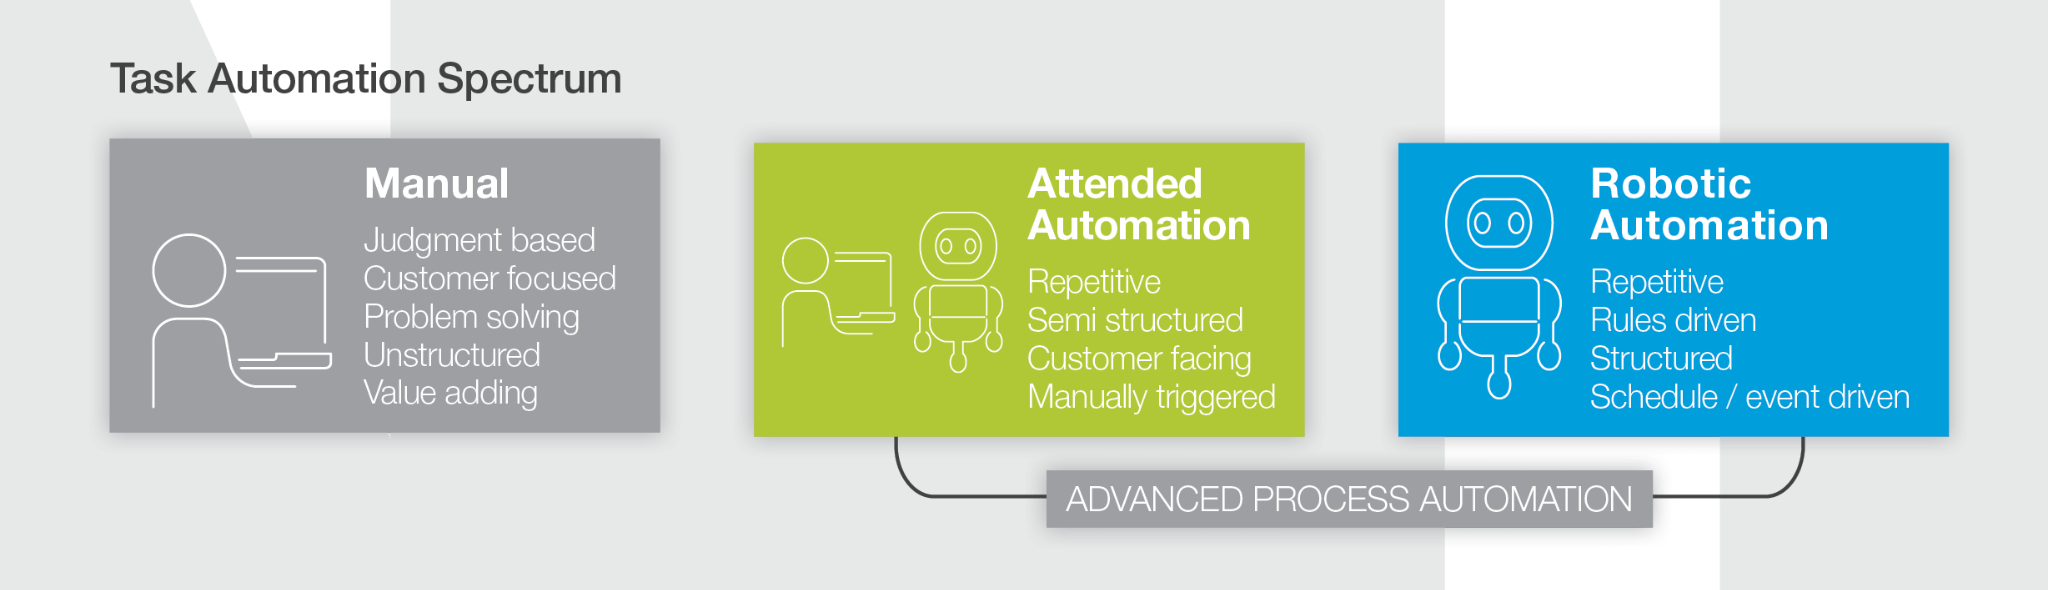 RPA and the Task Automation Spectrum illustration image